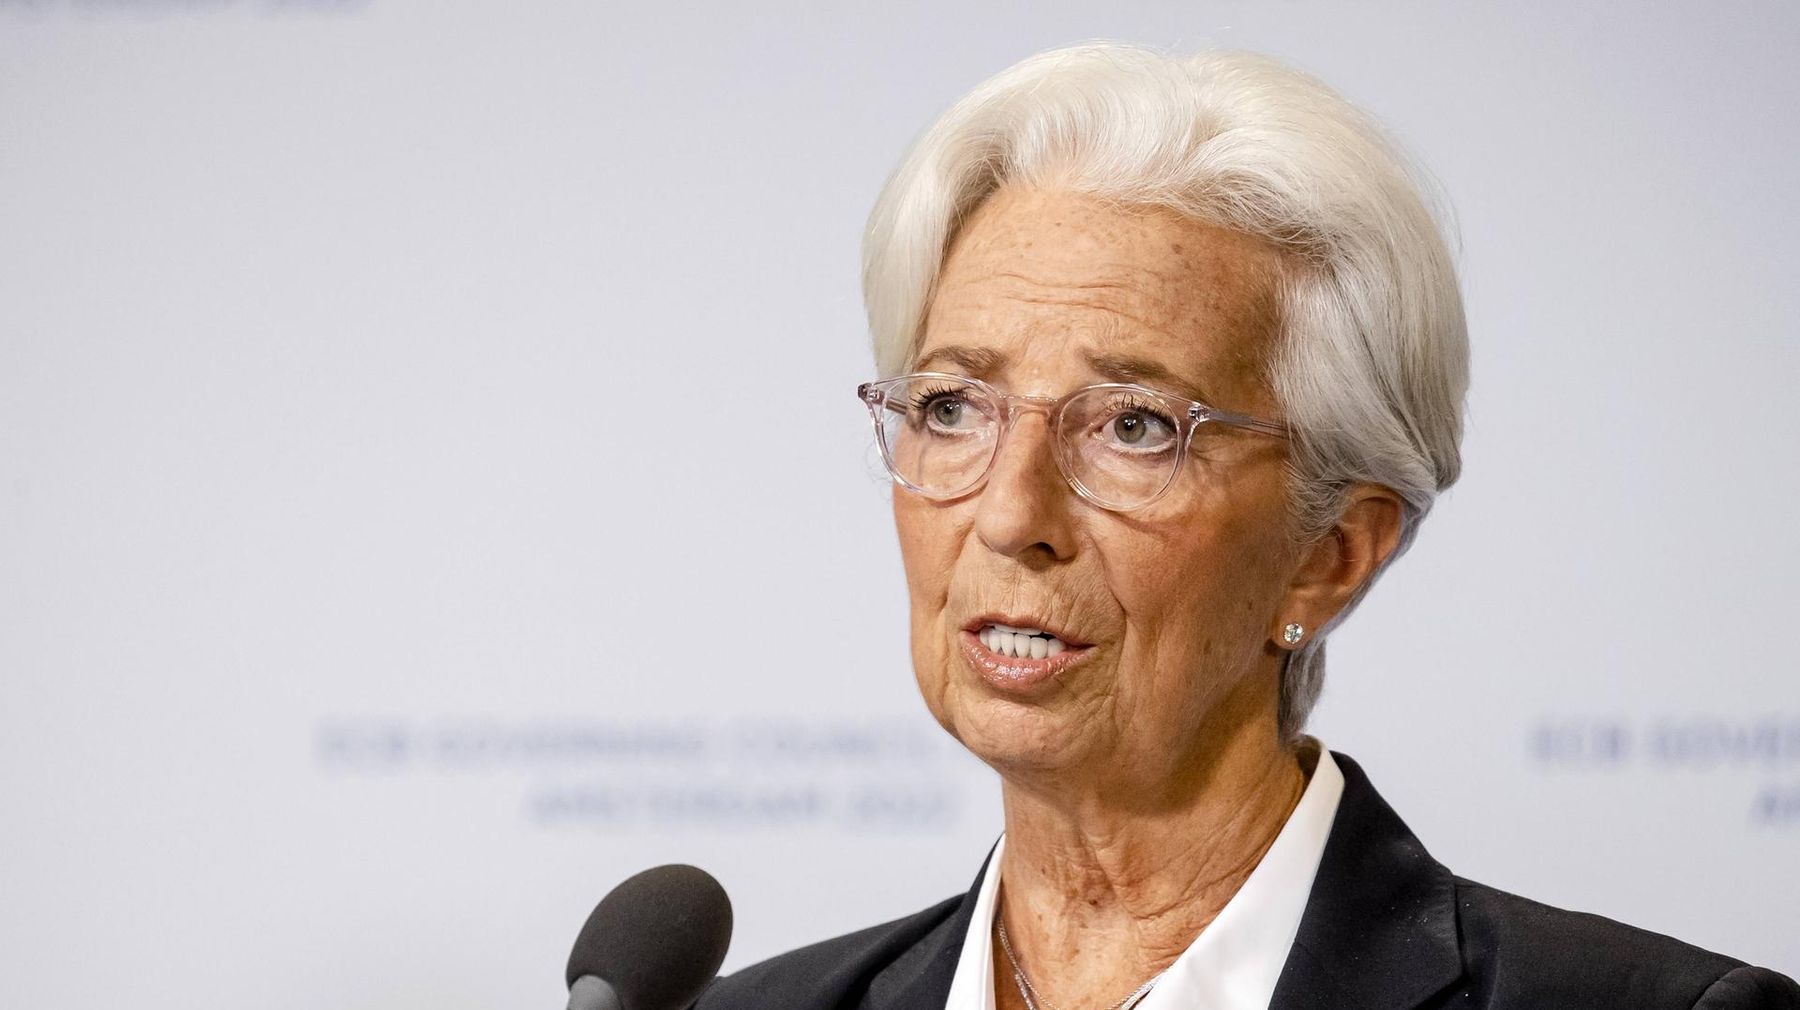 Lagarde: Will the ECB interest rates continue to rise?